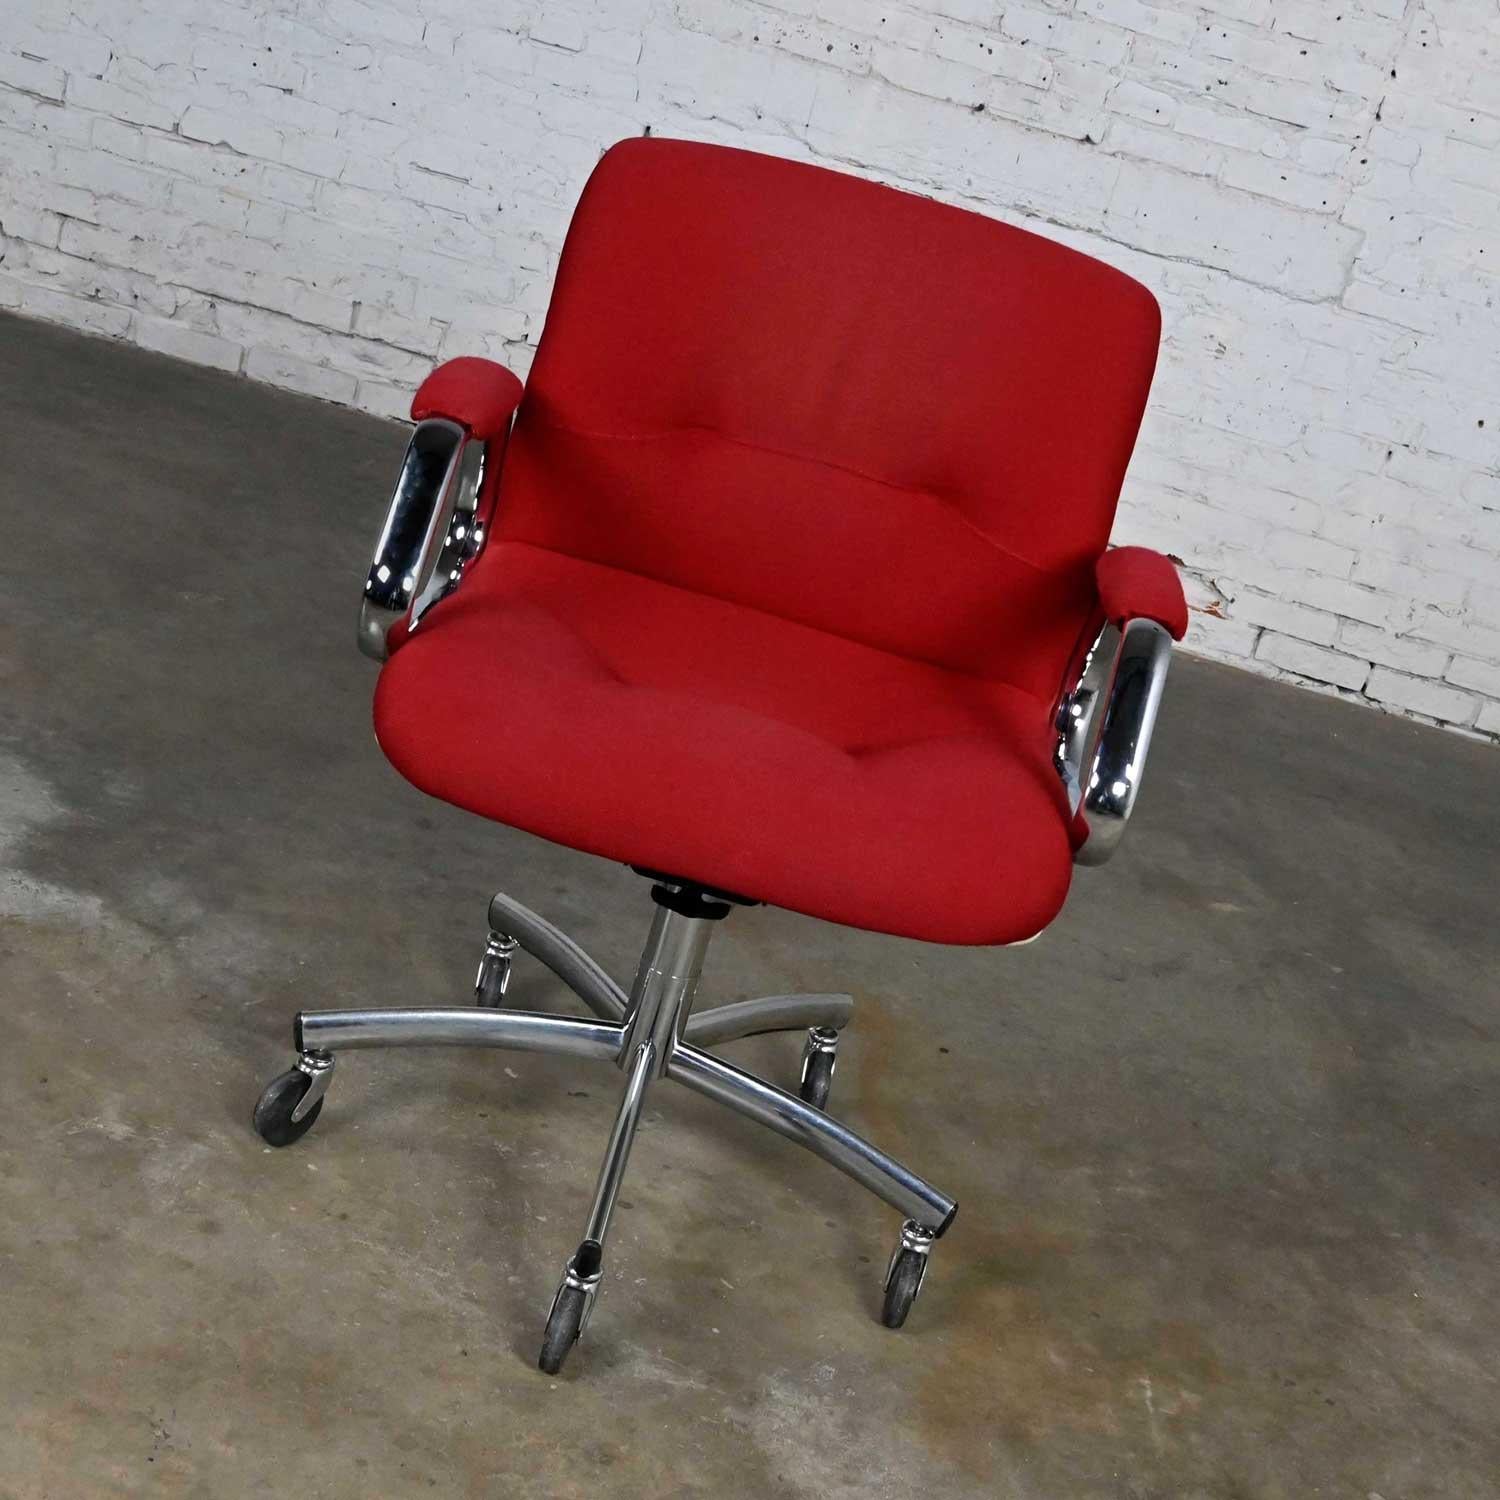 Modern Steelcase Chrome & Red Swivel Rolling Chair #454 Style Charles Pollock For Sale 1